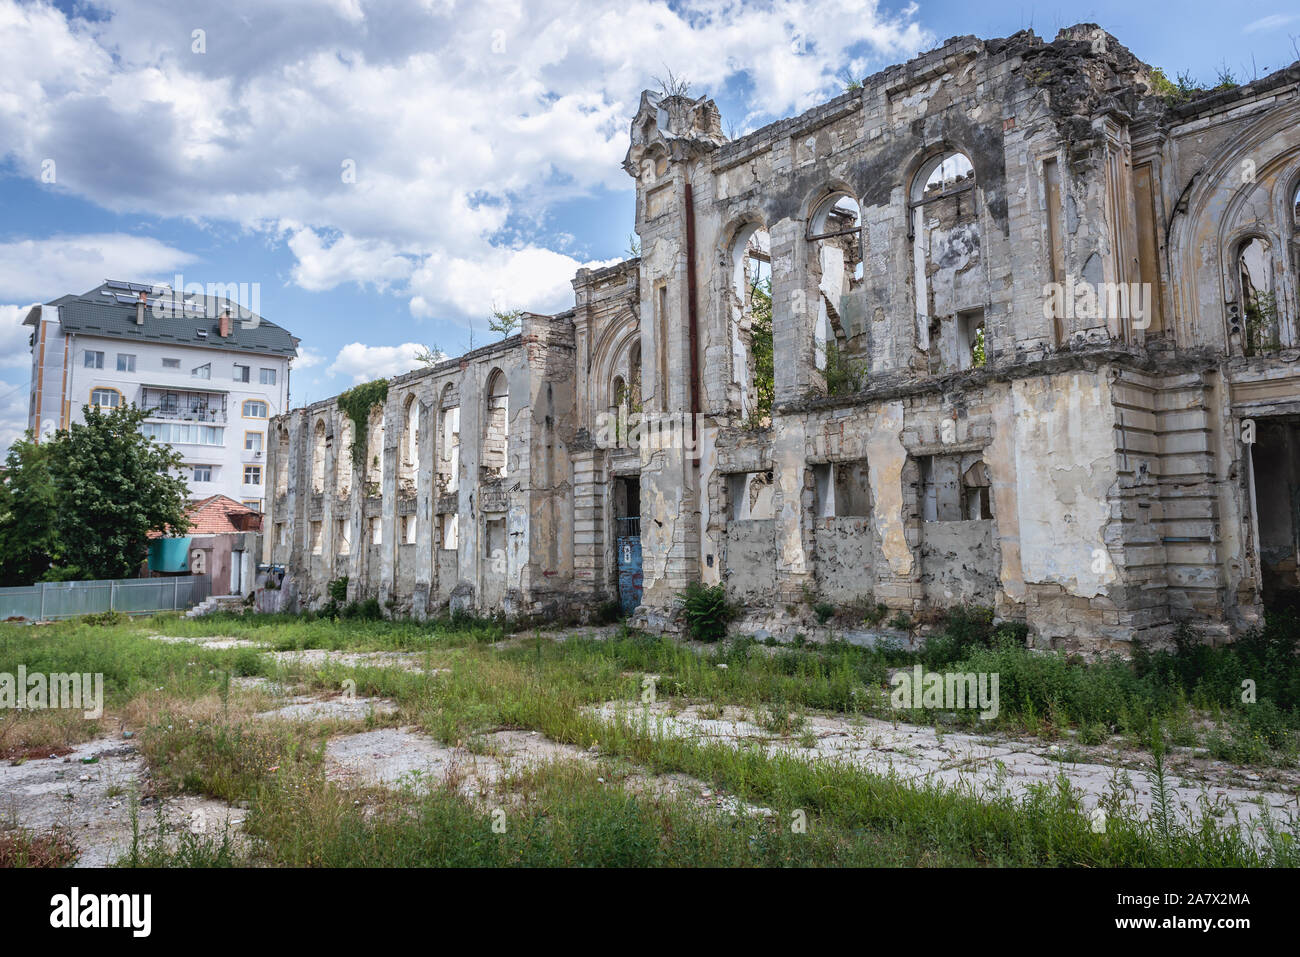 Ruins of synagogue building in Chisinau, capital of the Republic of Moldova Stock Photo